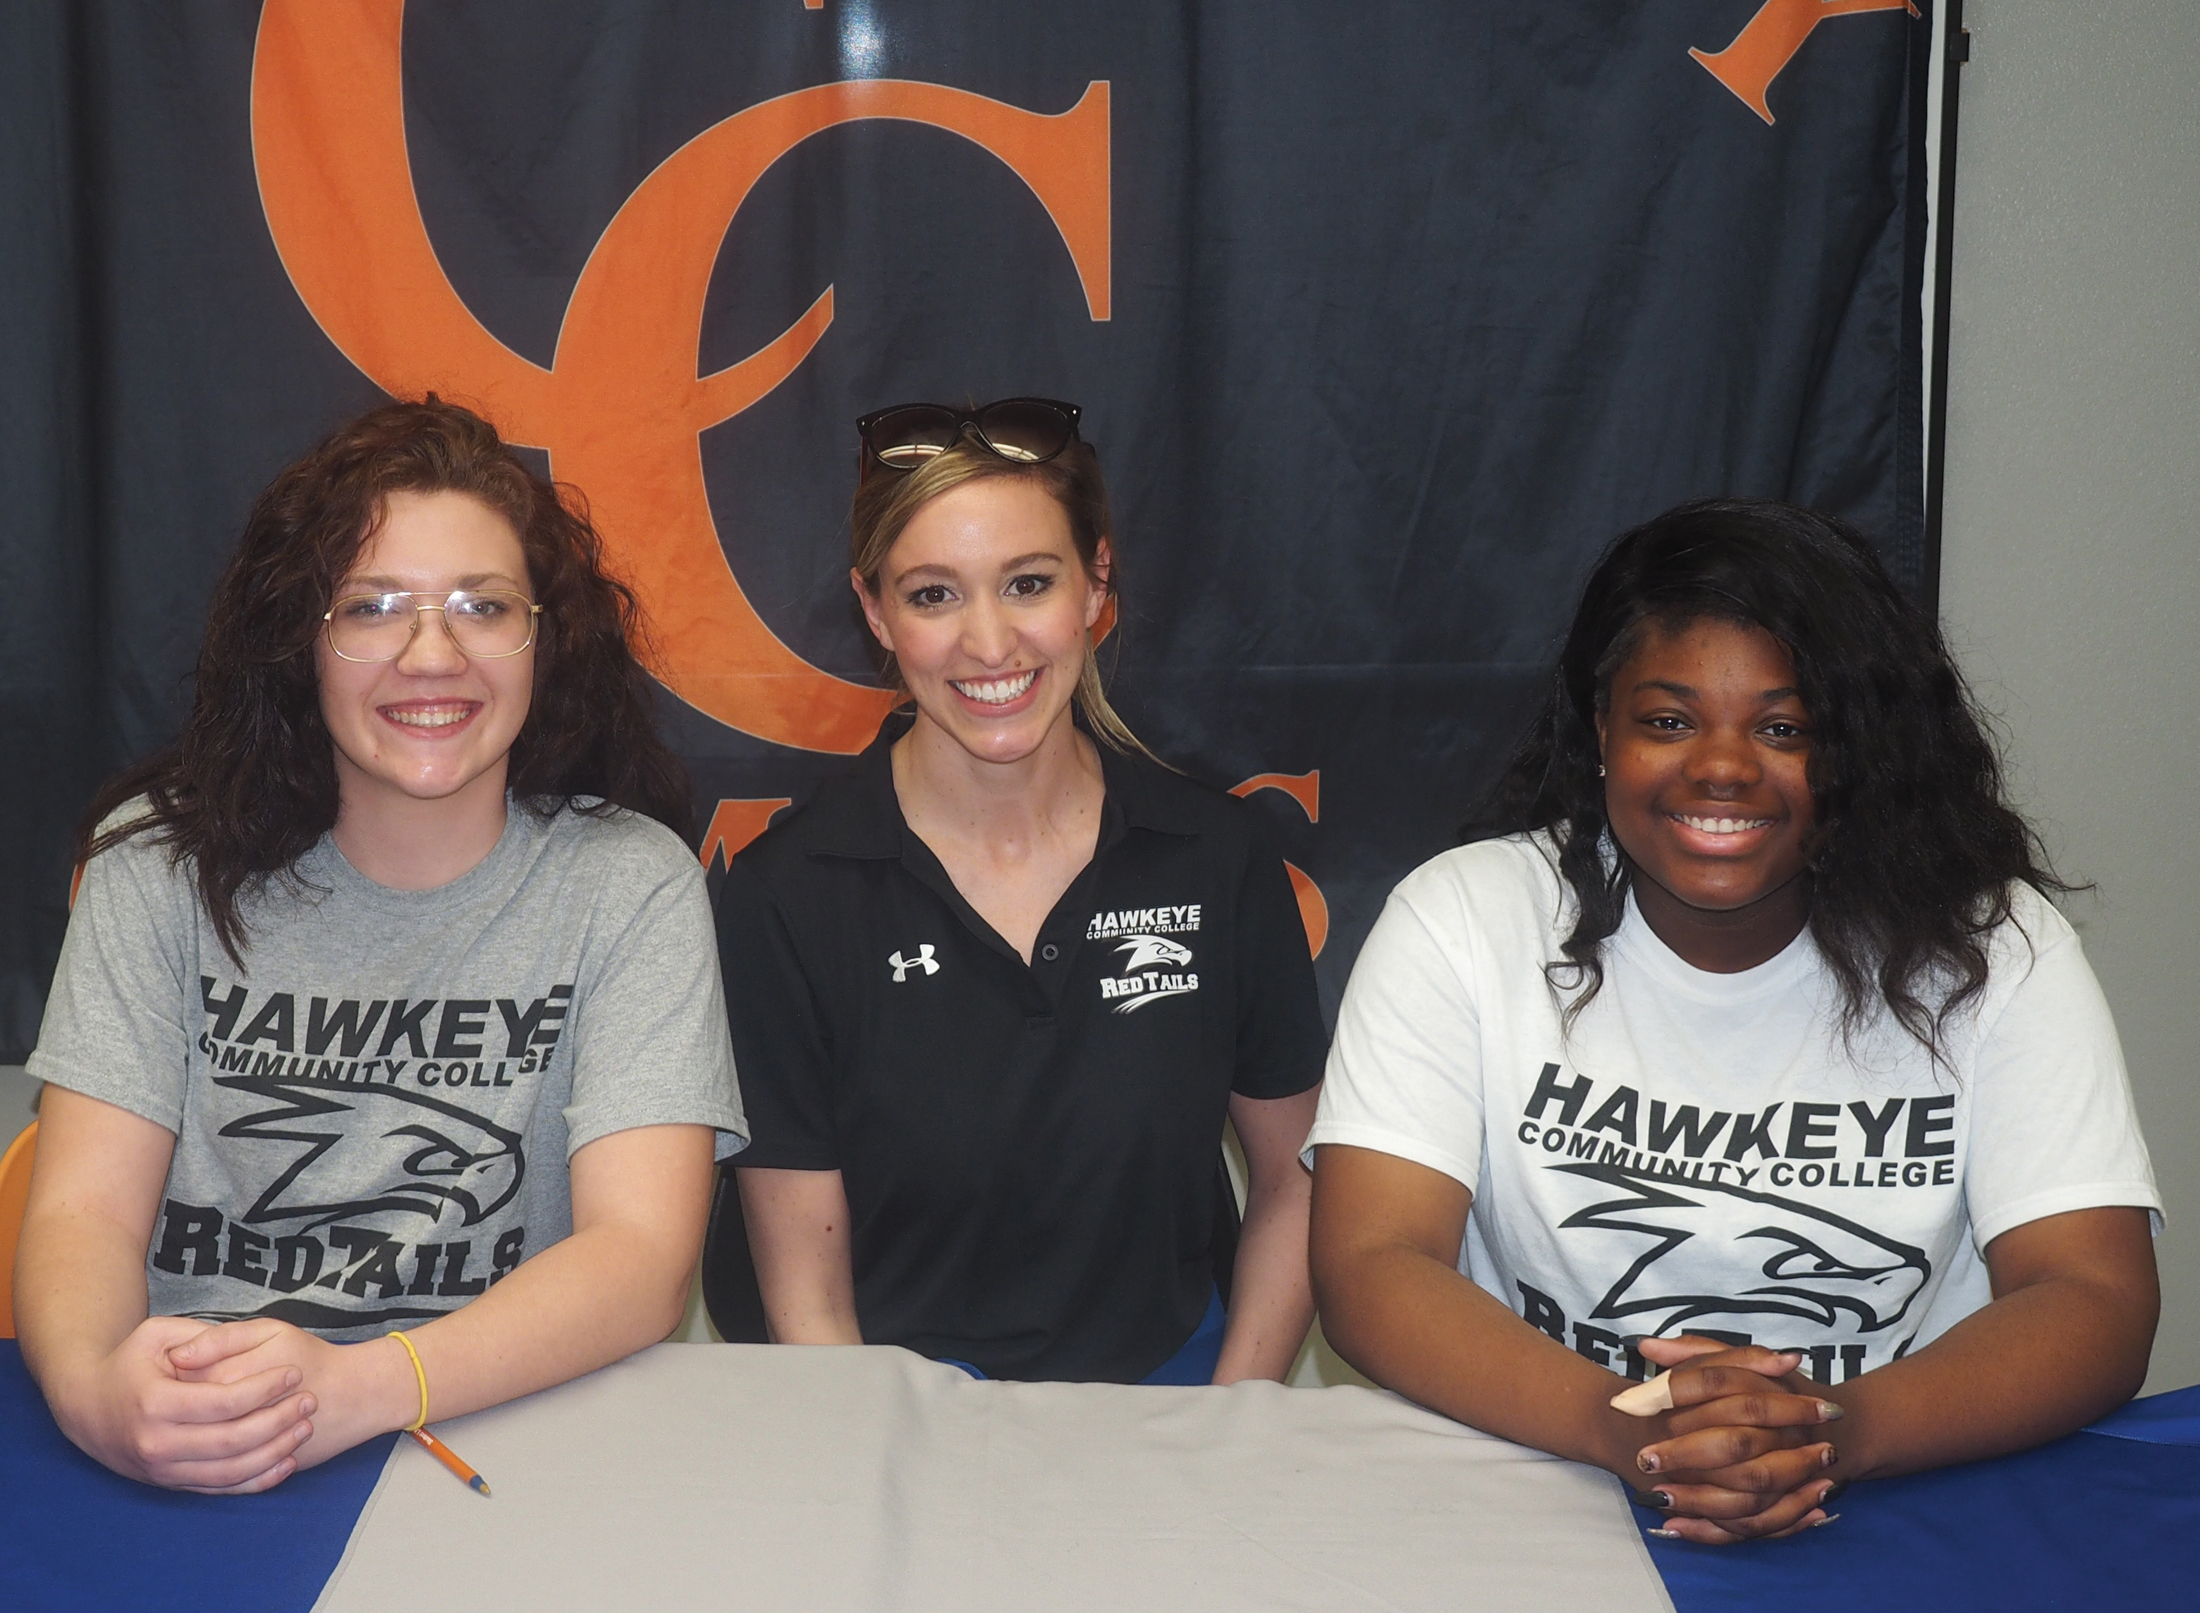 Comet dancers Allen, Jepperson sign with Hawkeye CC